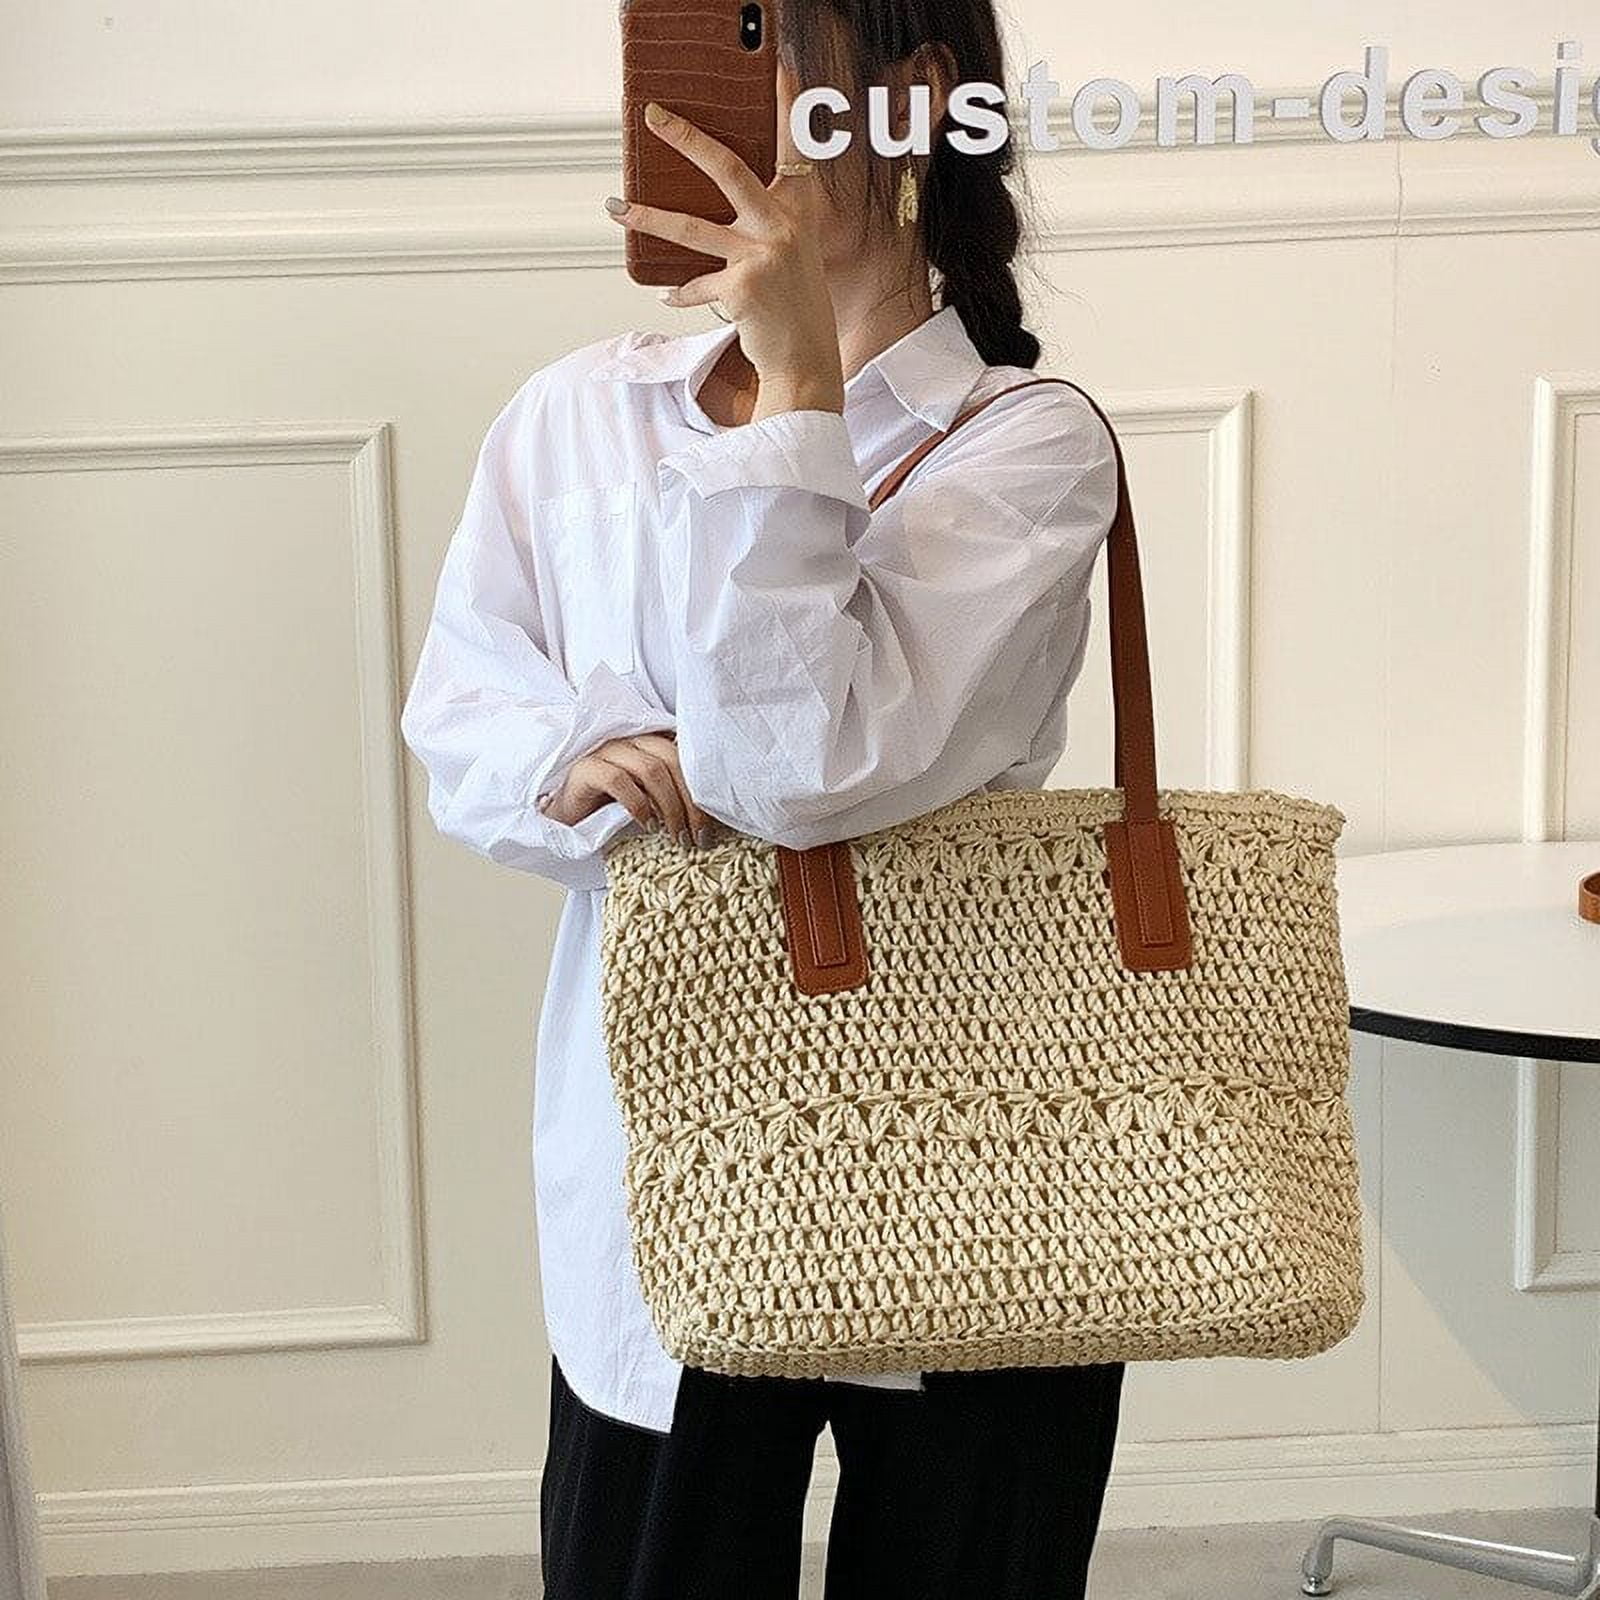 Cocopeaunt Summer Fashion Small Straw Weaving Shoulder Bags for Women Casual Tassel Beach Crossbody Bag Purse Hollow Out Messenger Handbags, Adult